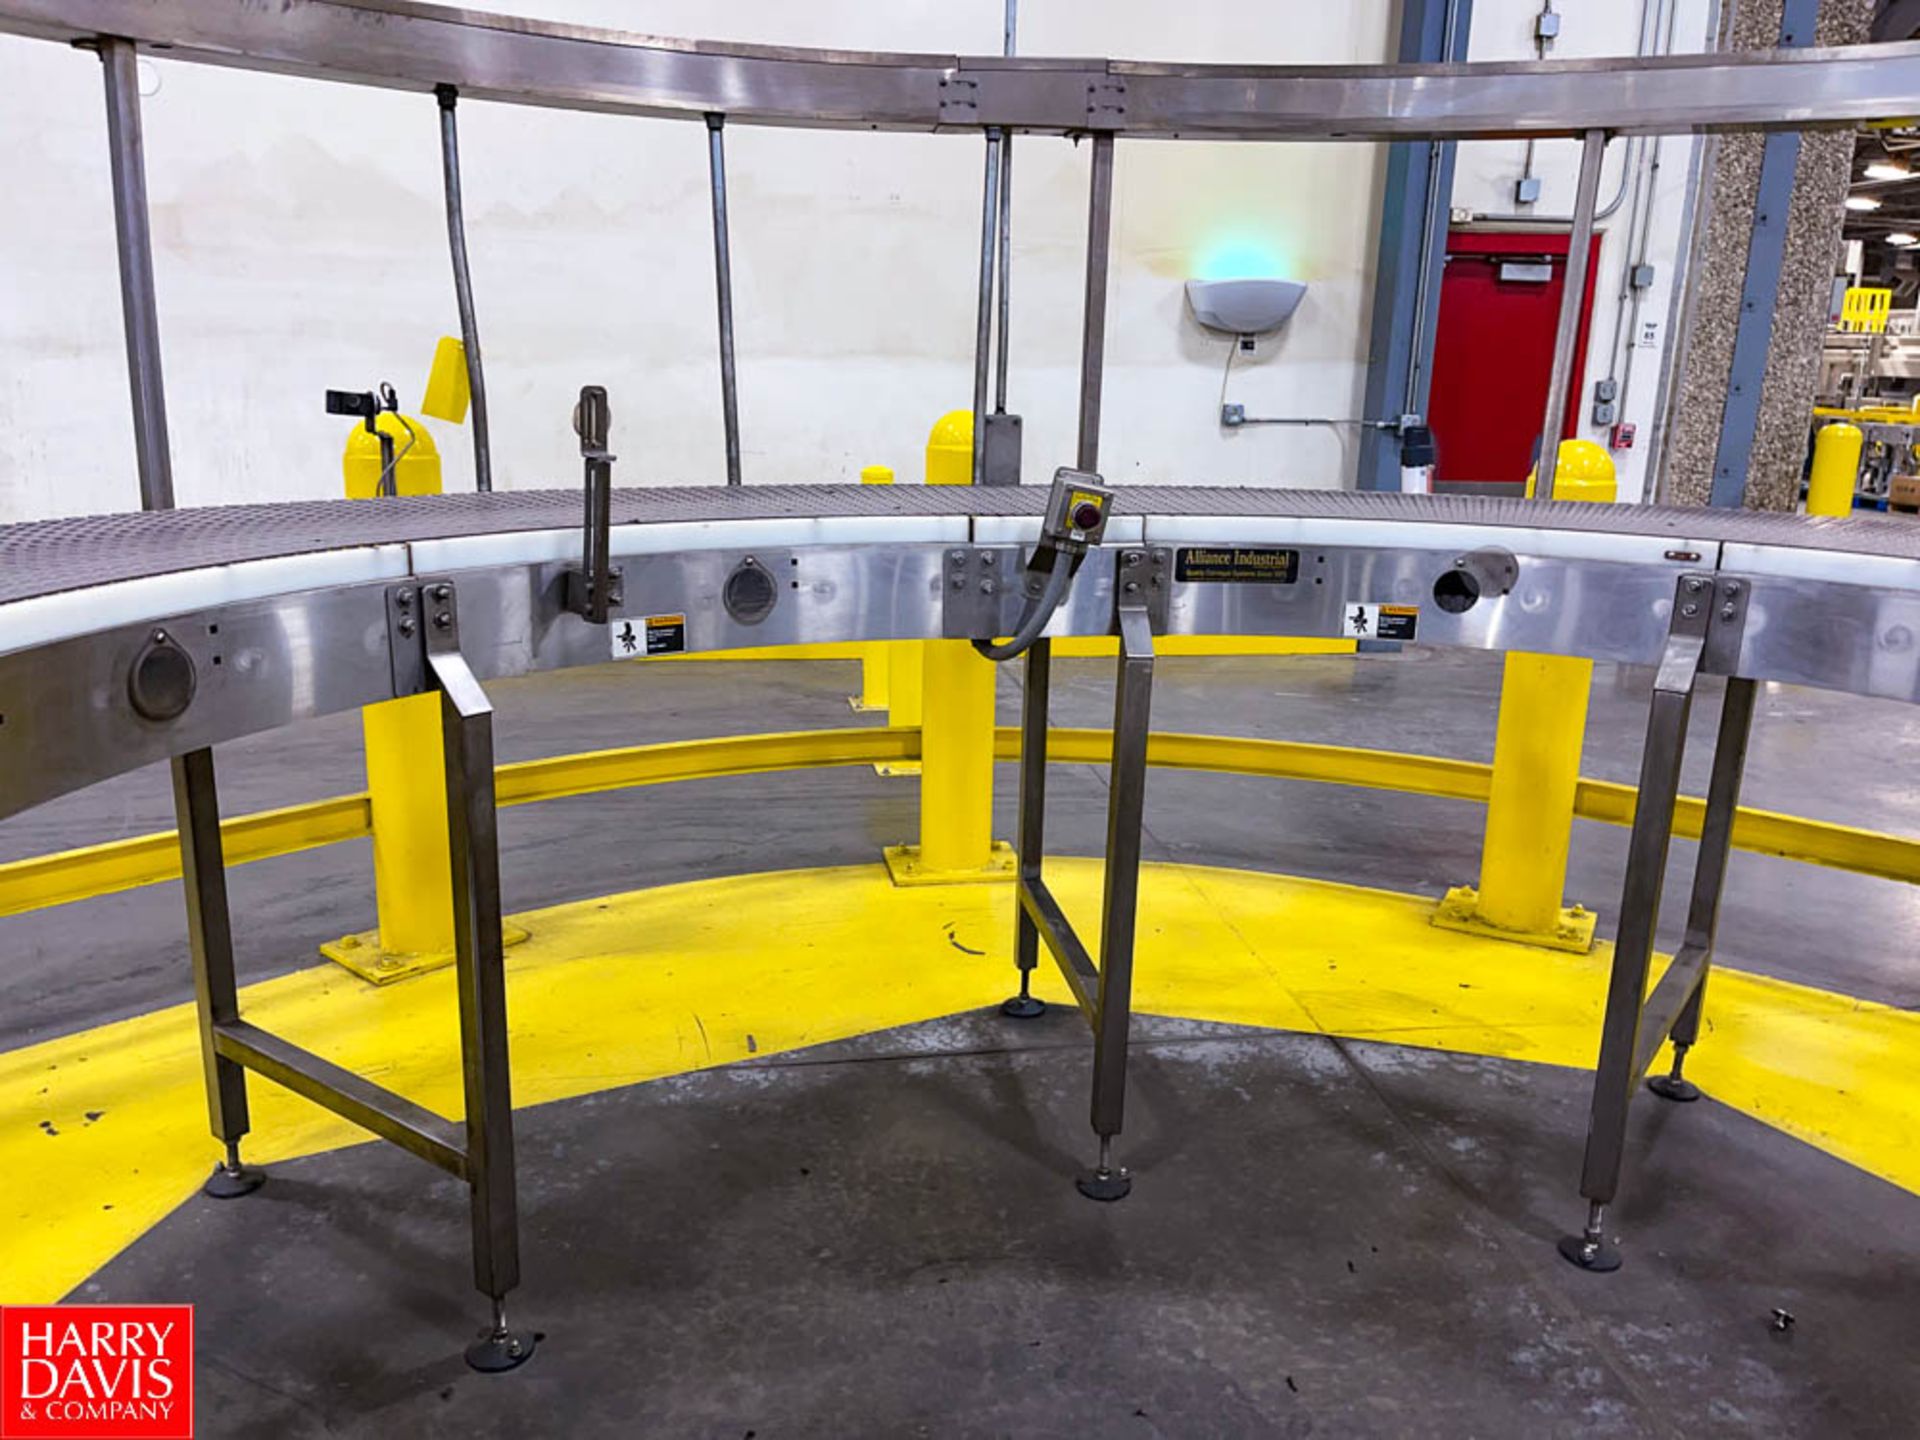 Alliance 29' S/S Frame 180 Degree Power Conveyor Drive 24"" Wide Rigging Fee: $ 1500